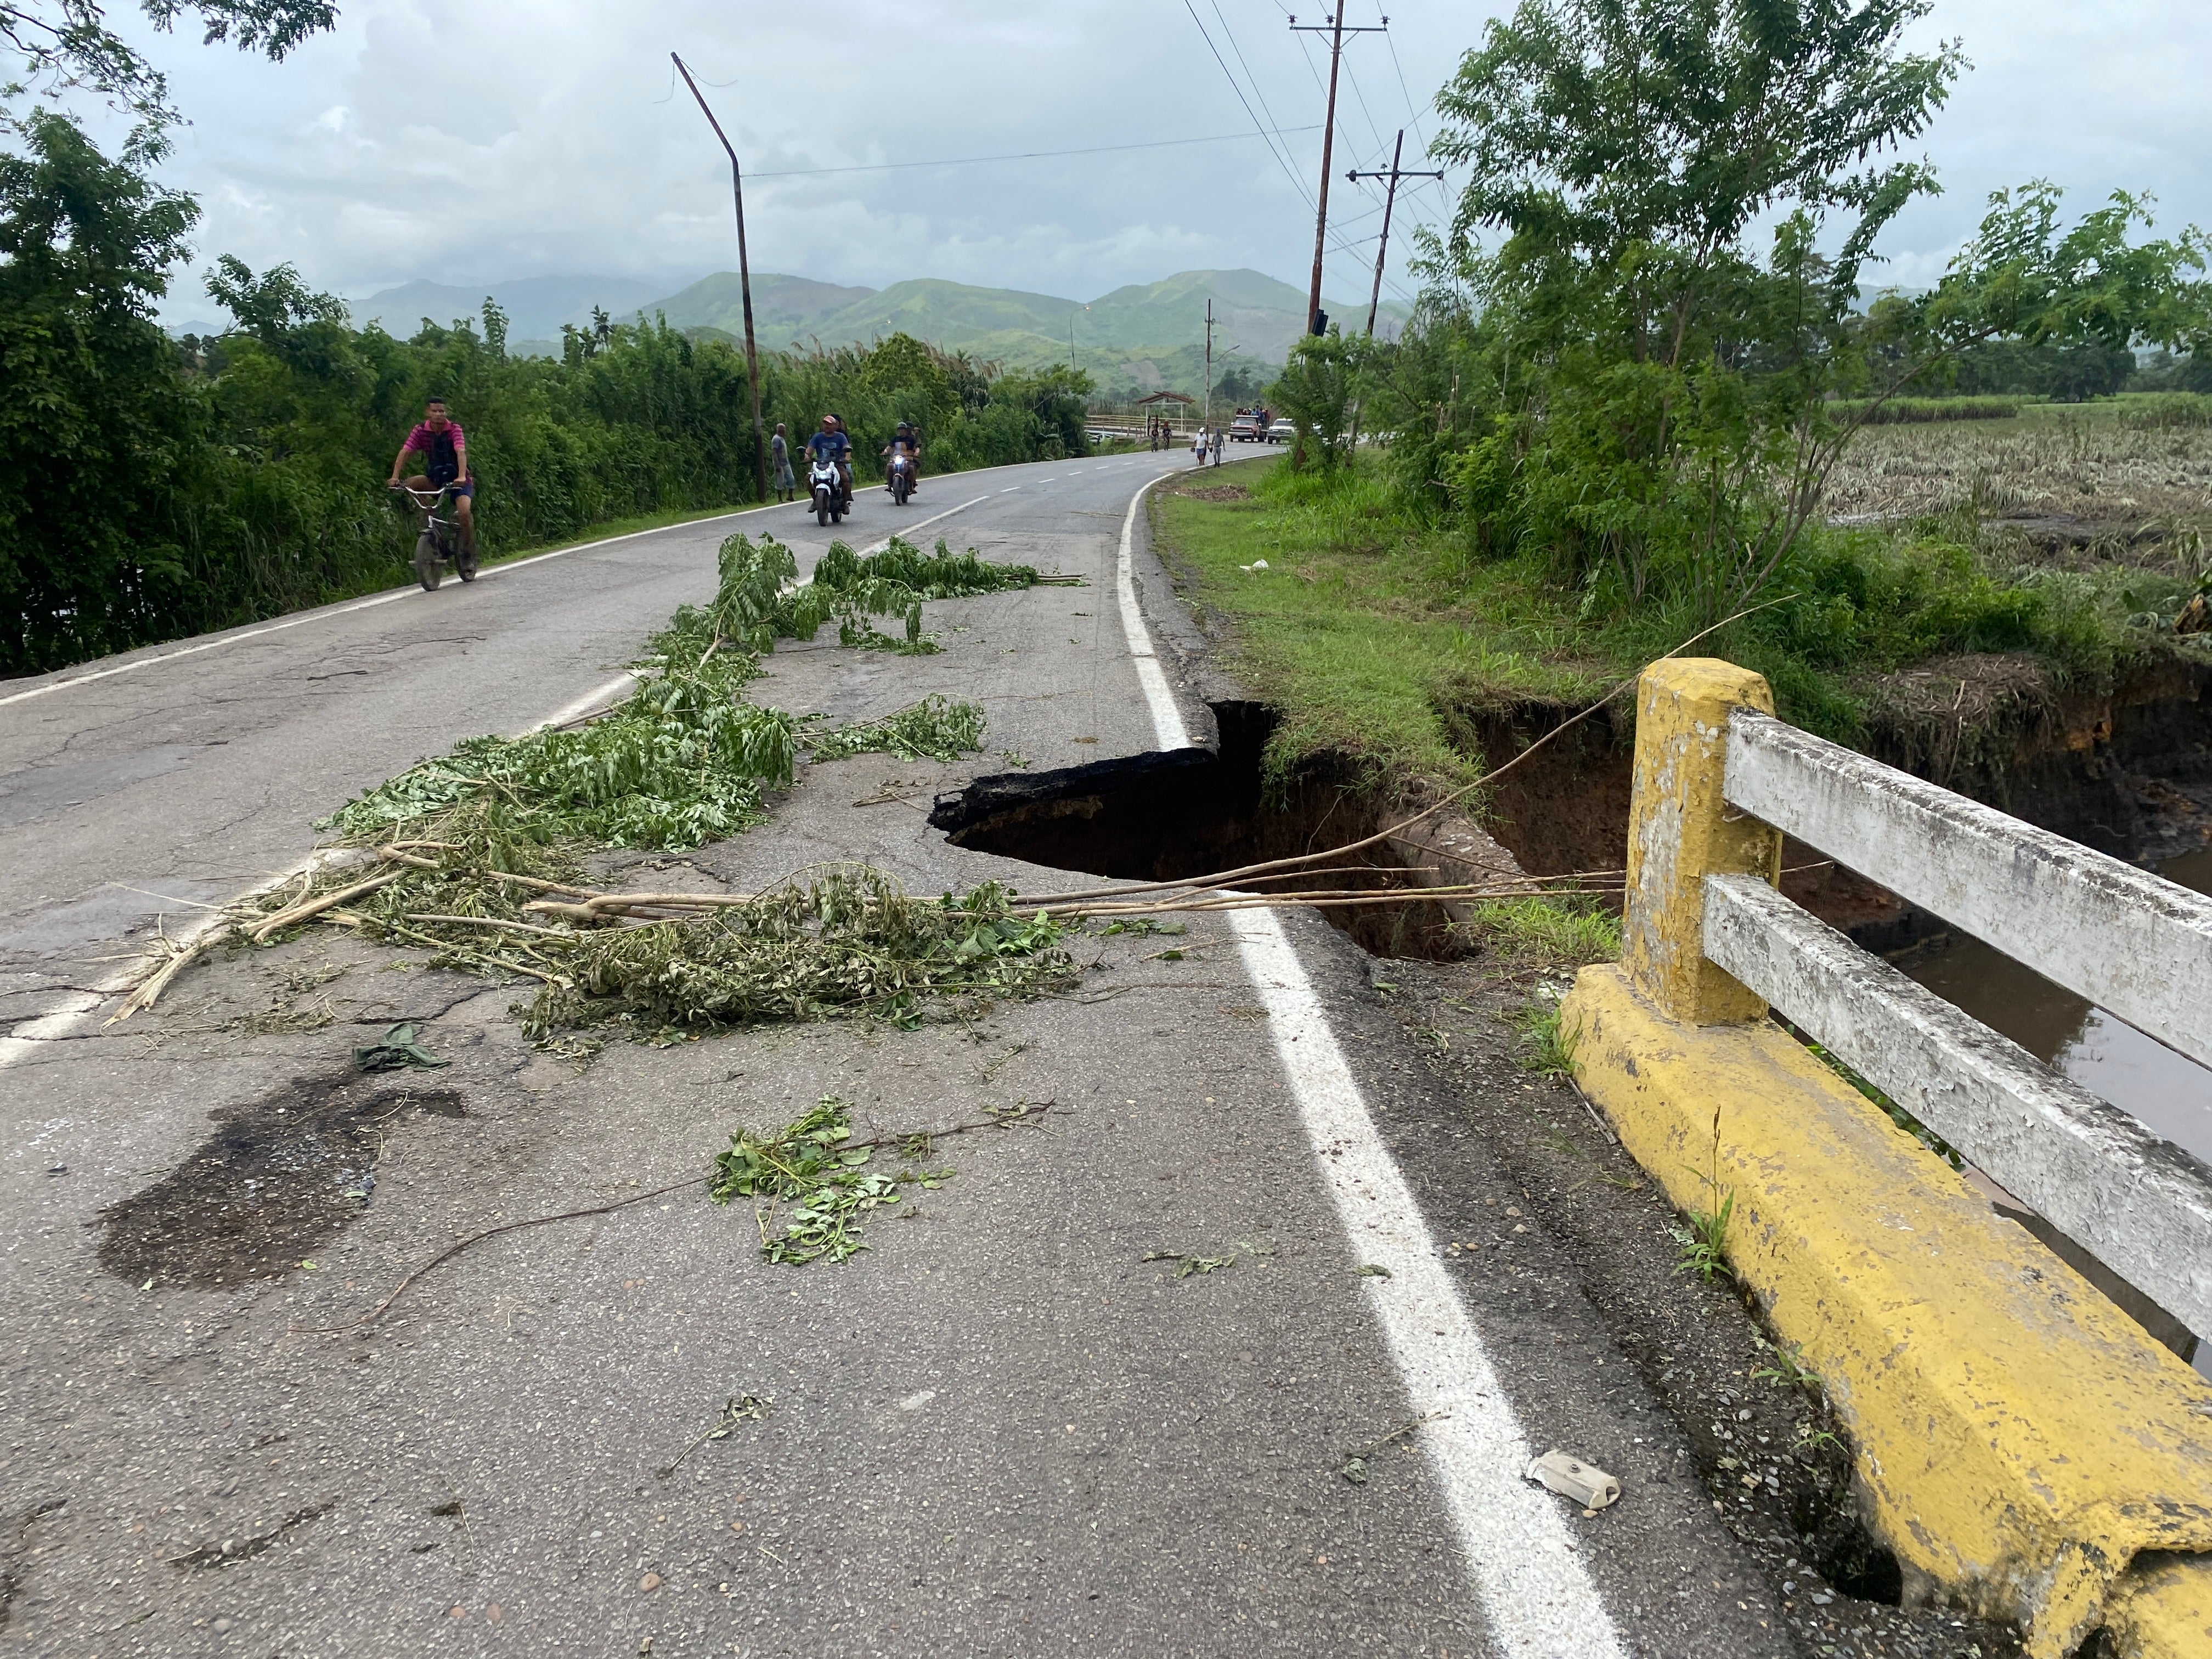 A view of a damaged road after a river swelled due to heavy rains following Hurricane Beryl in Comanacoa, Sucre state, Venezuela.